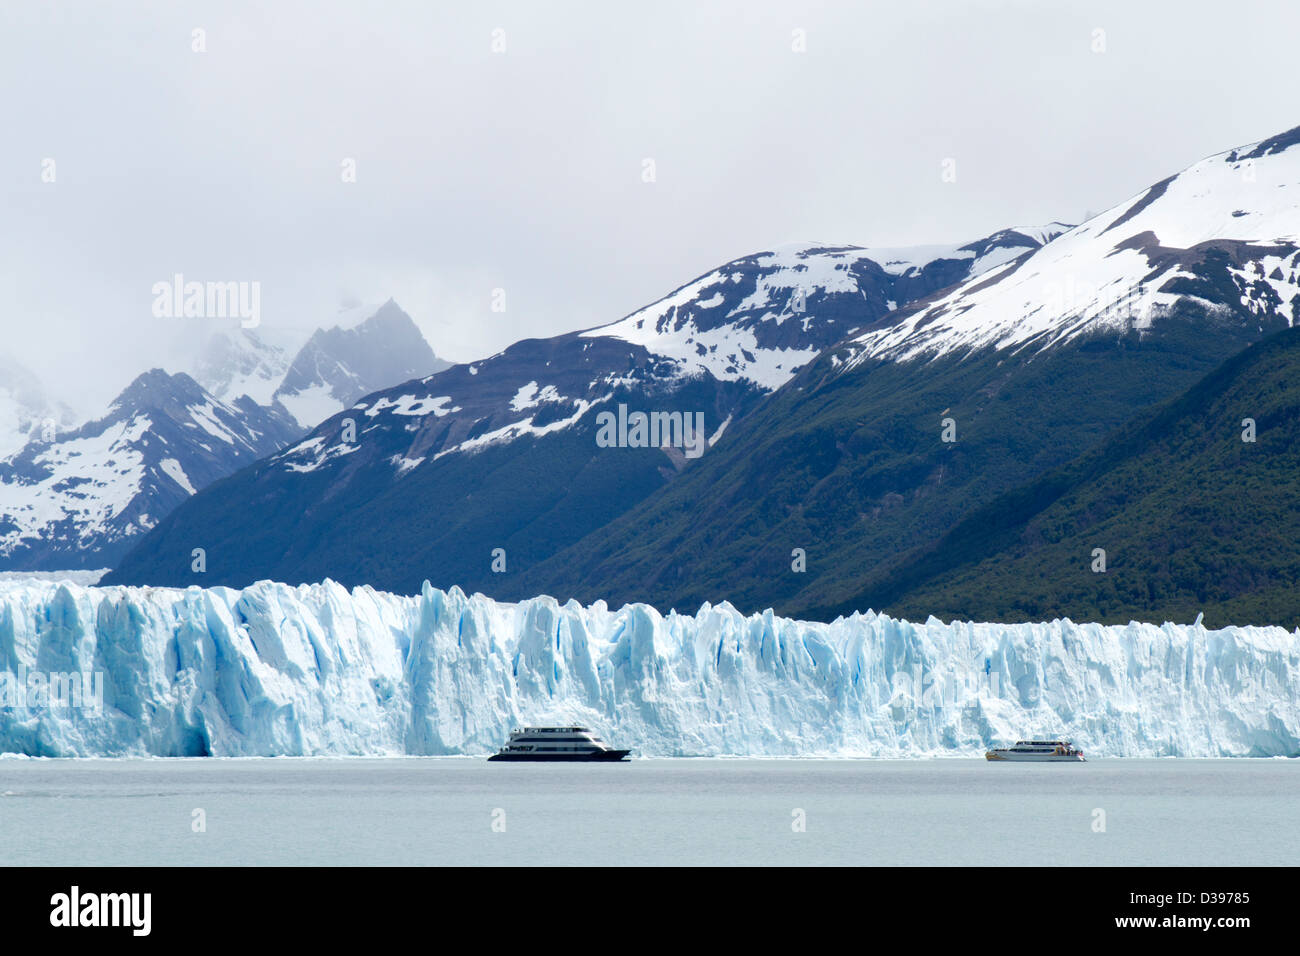 Cruise boats sit idle in front of the towering Perito Moreno glacier in Patagonia, Argentina Stock Photo